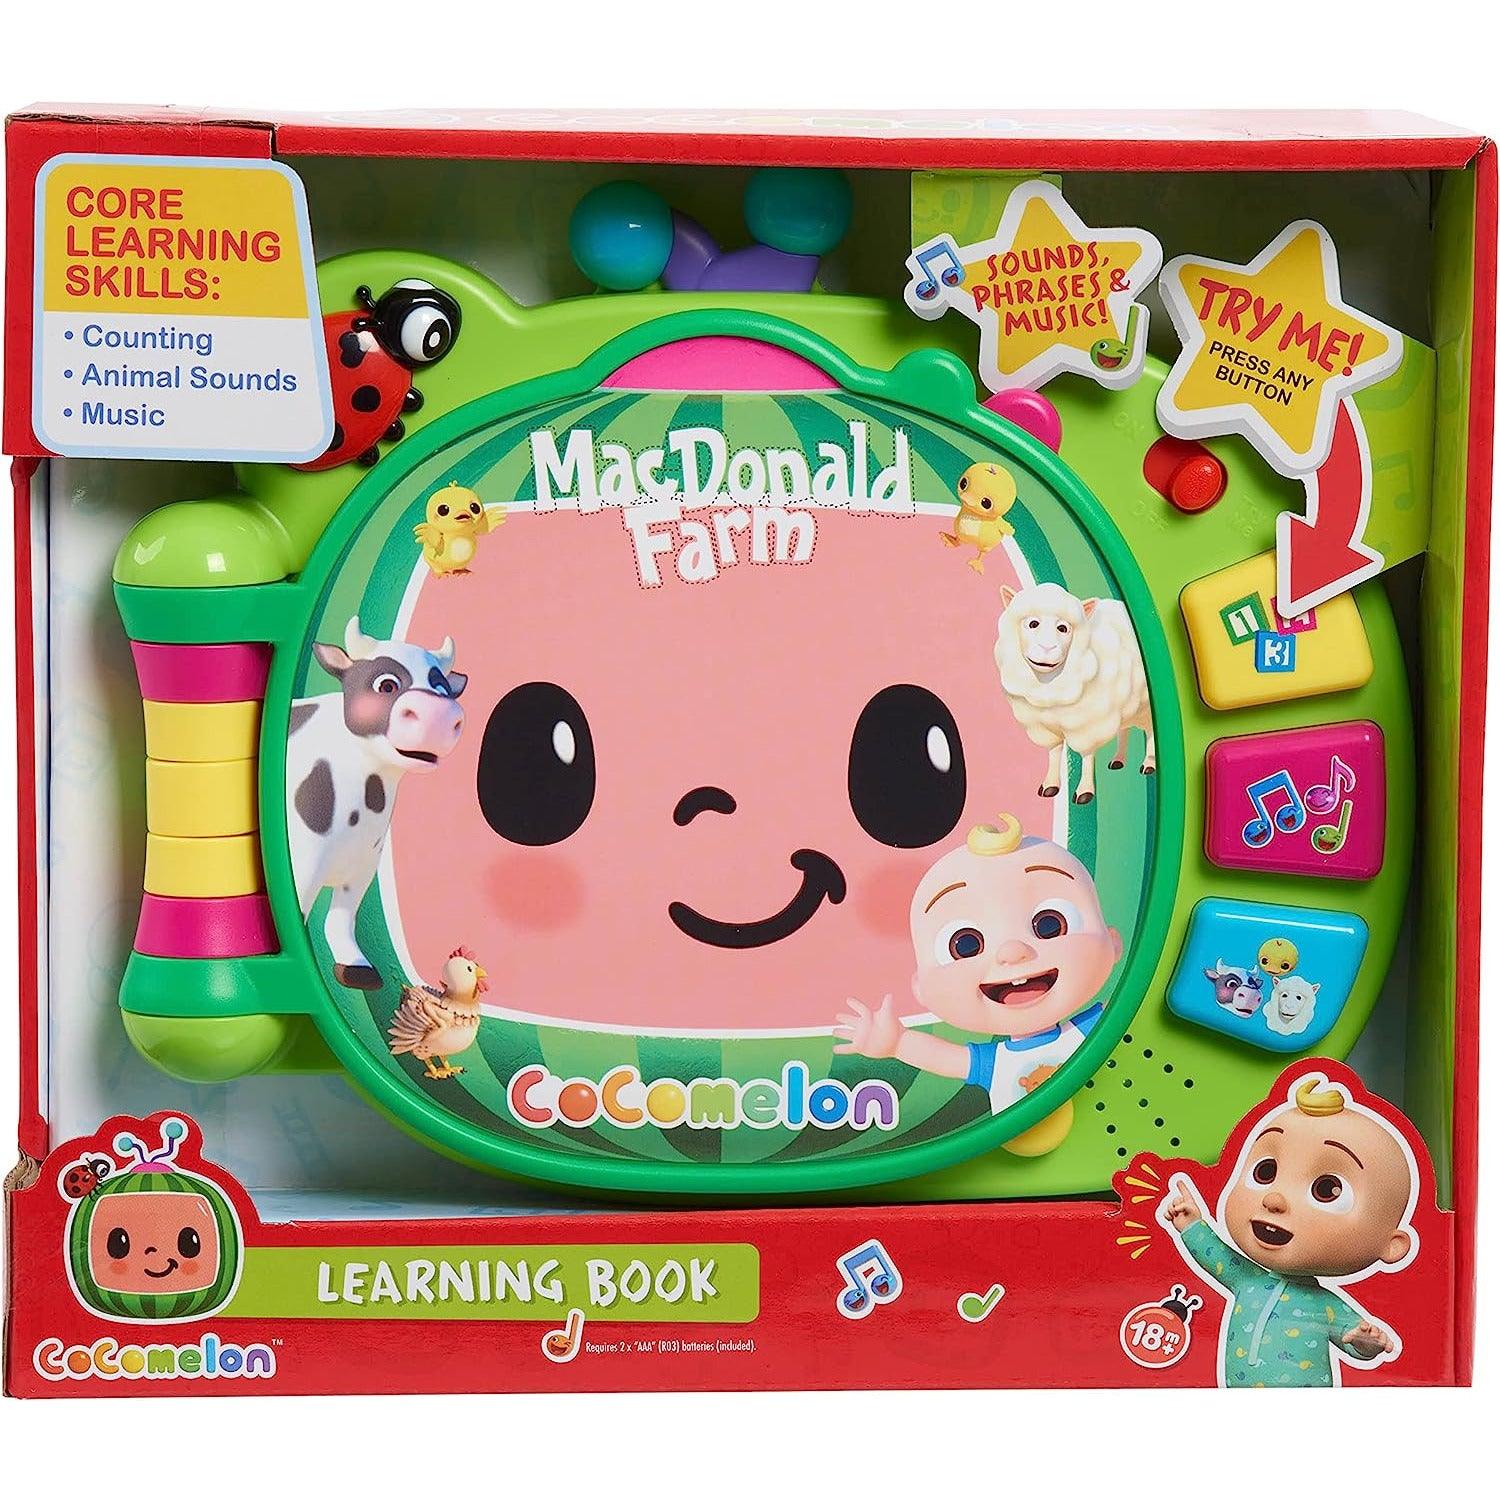 CoComelon Learning Book Interactive Toy for Toddlers with 3 Learning Modes